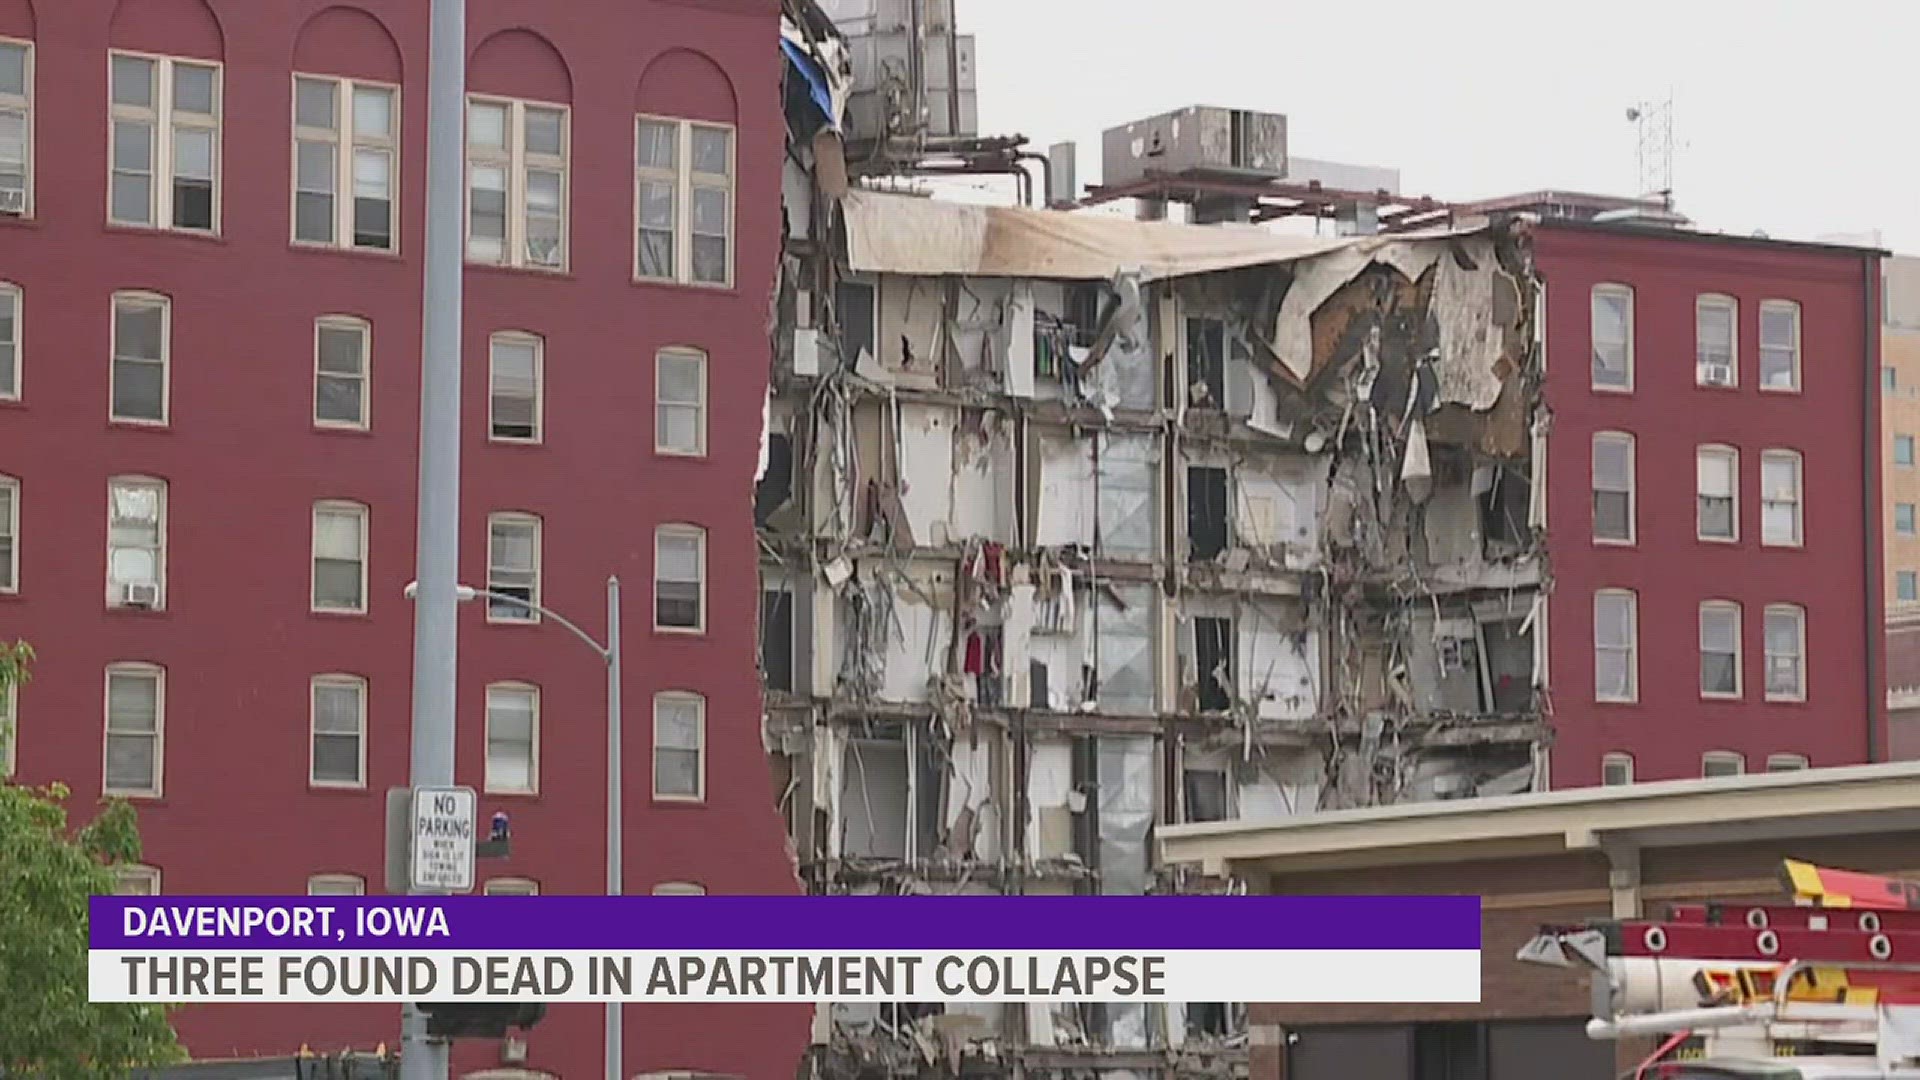 Davenport City officials discuss the next steps they plan to take after the bodies of three missing men were recovered from the rubble of a collapsed building.